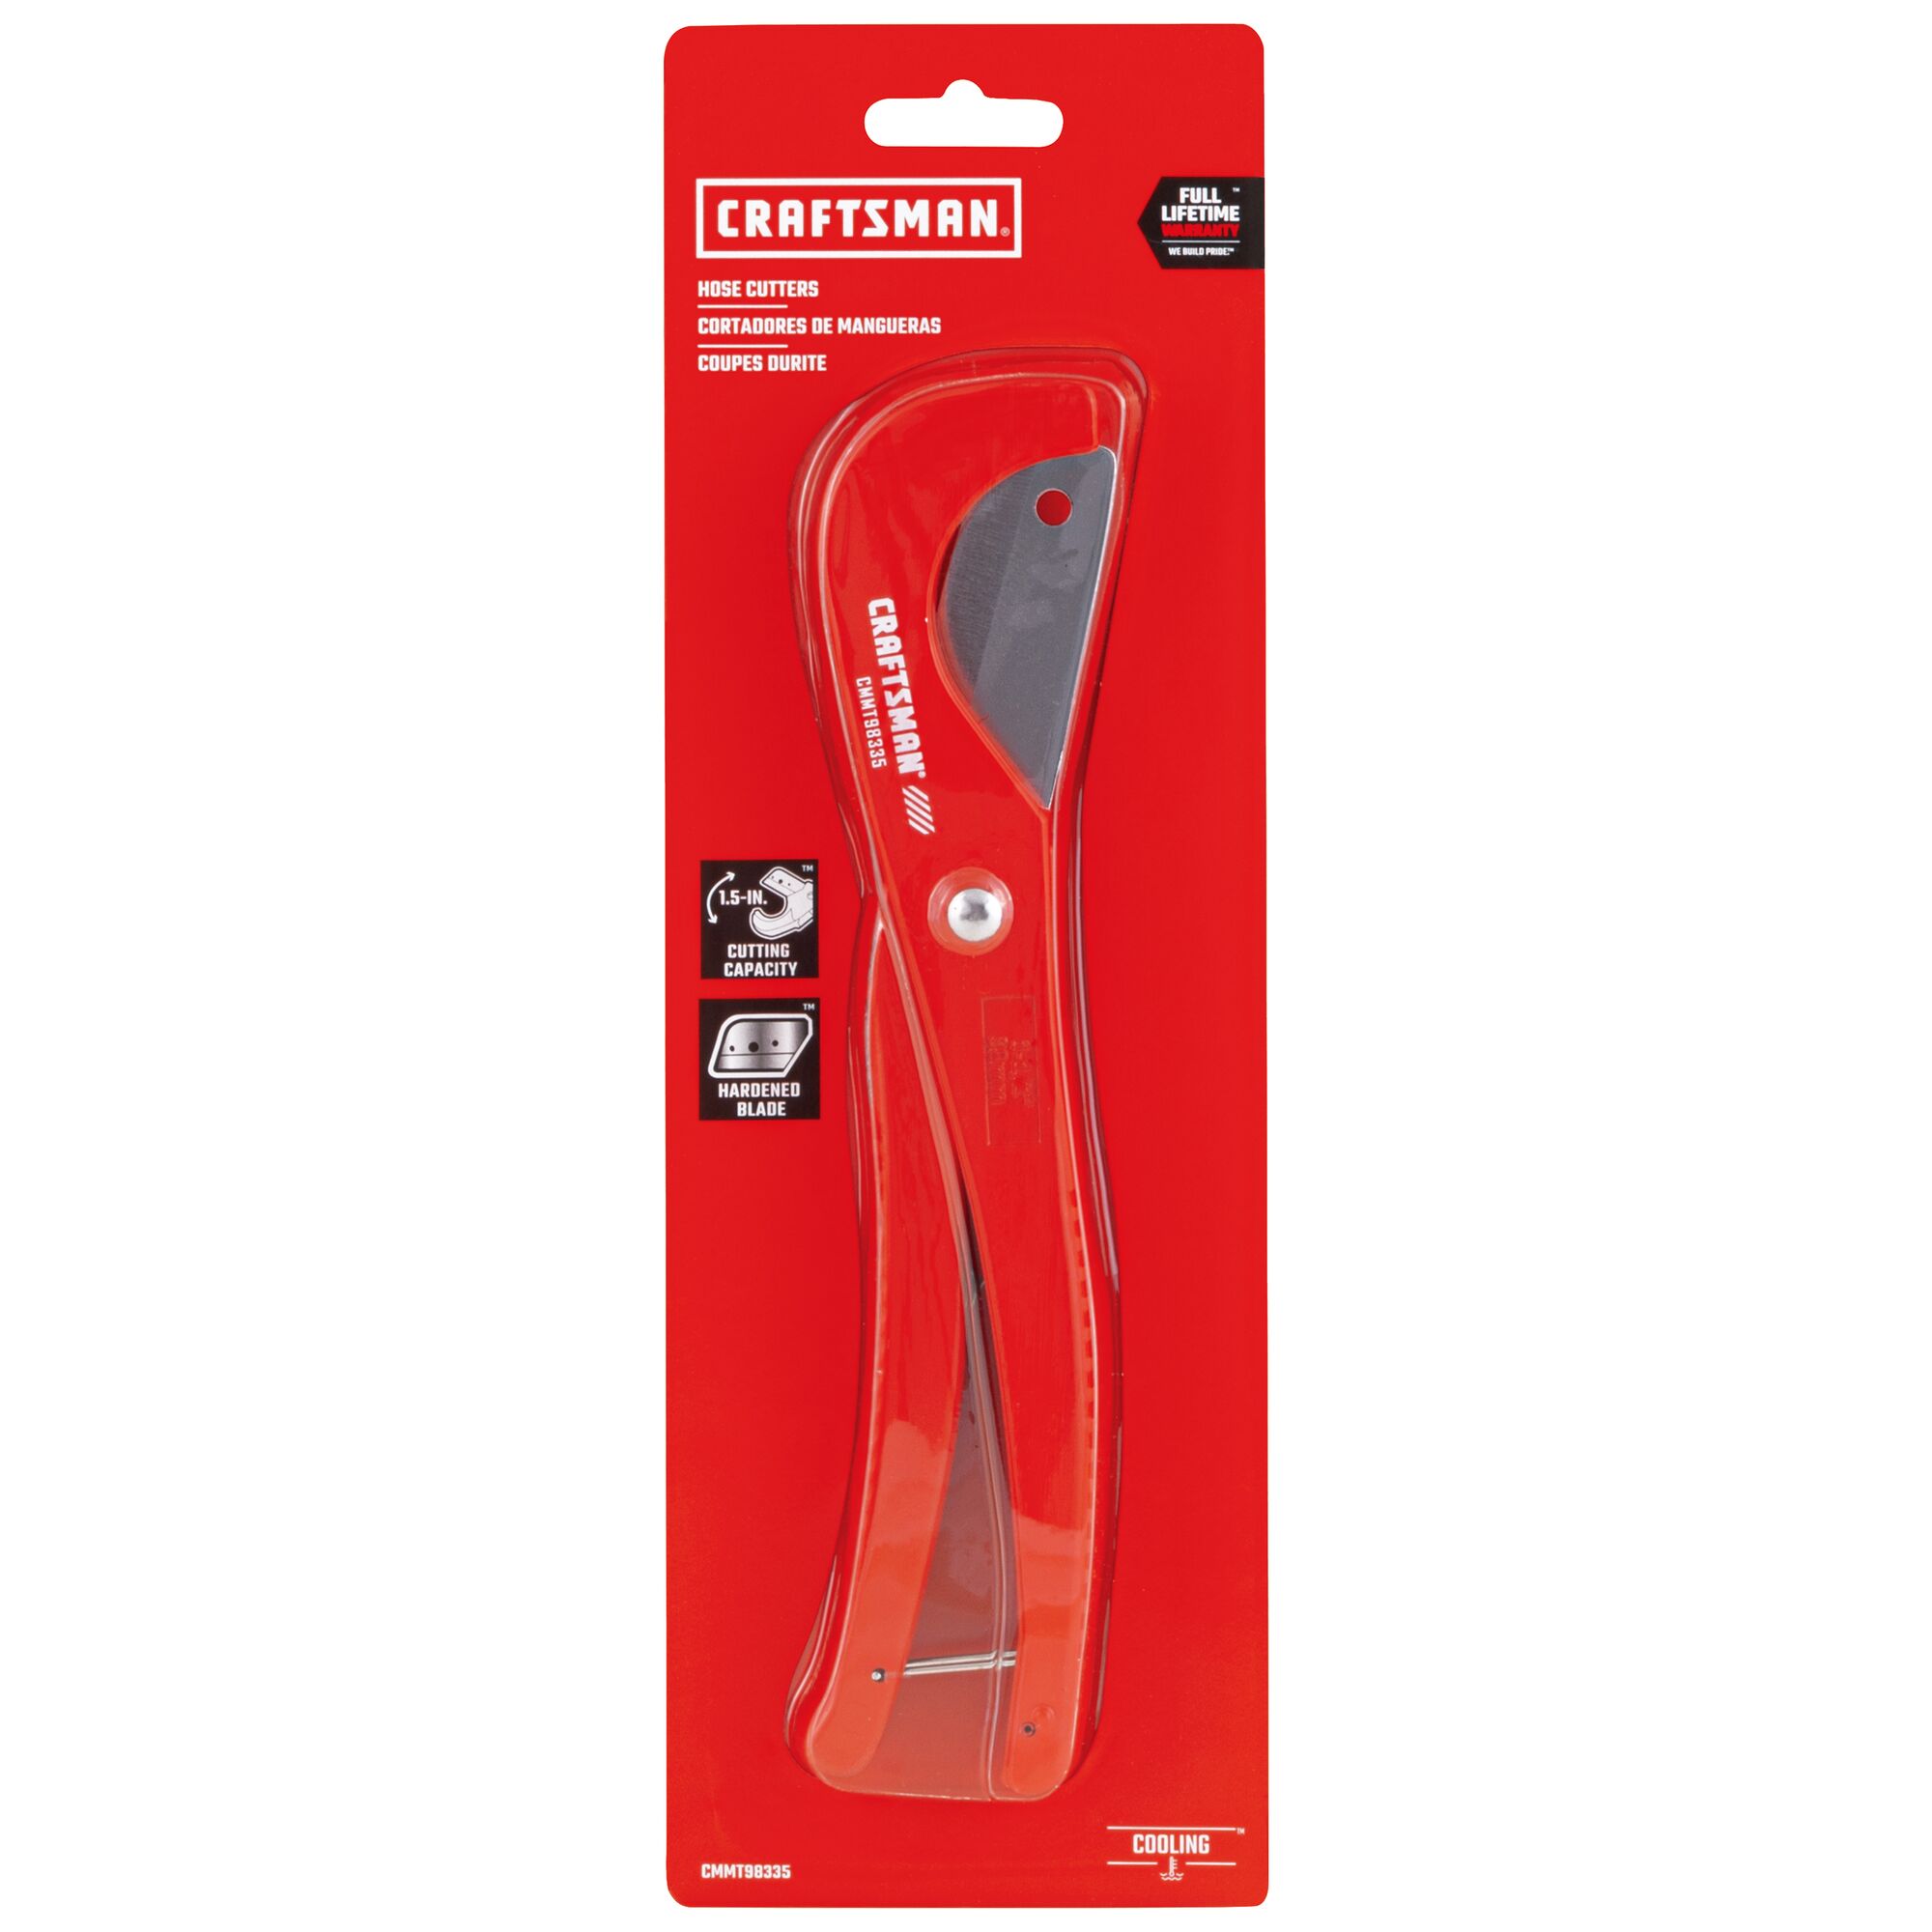 Hose cutters in boxed packaging.